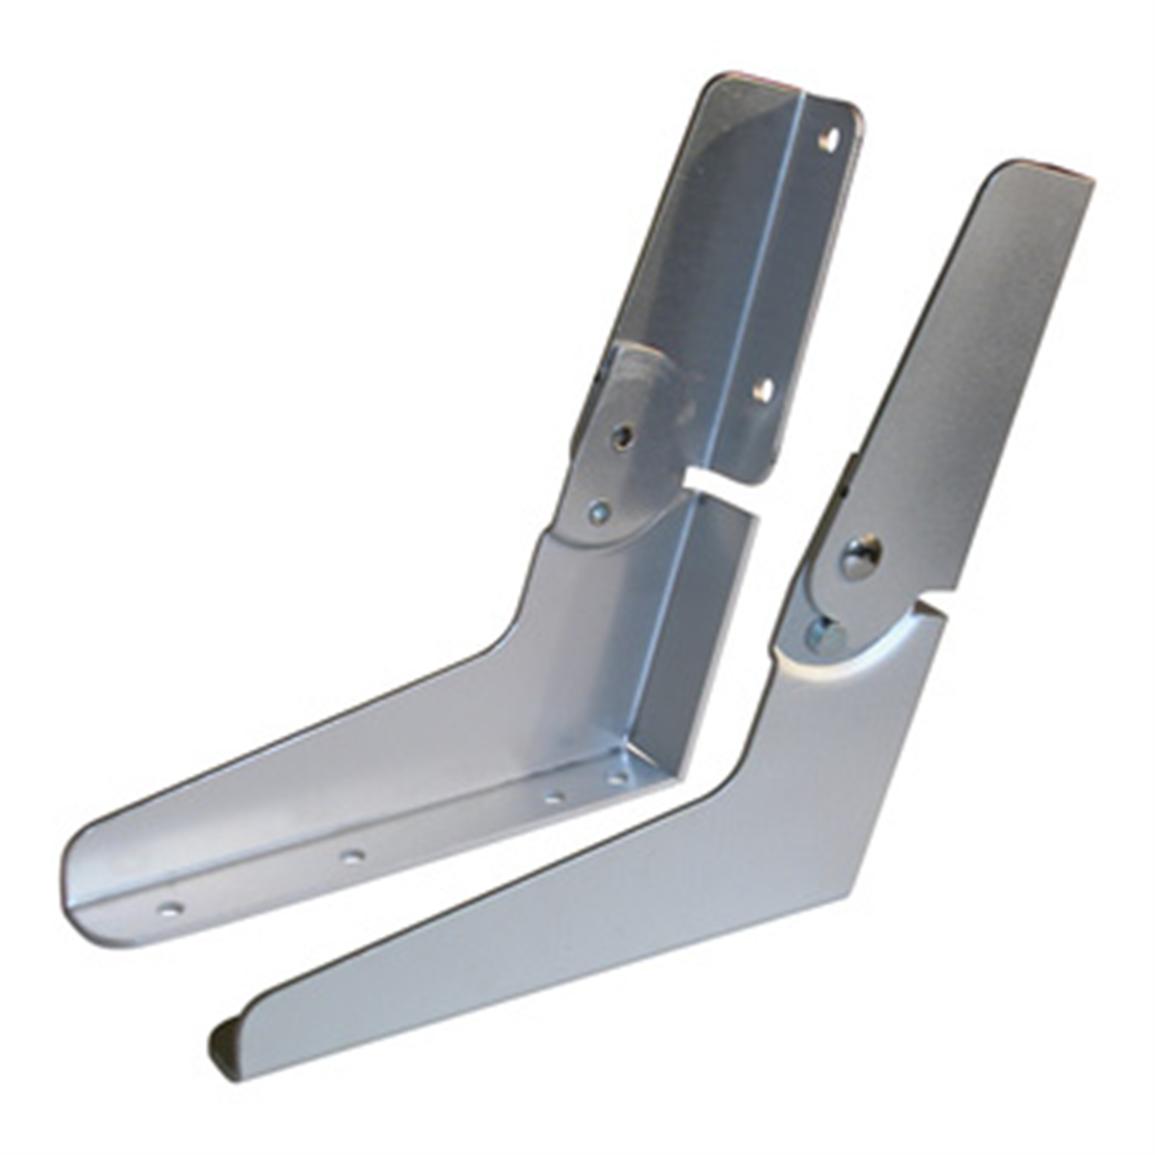 Wise® Folding Seat Hinge 171756, Boat Seat Accessories at Sportsman's Guide